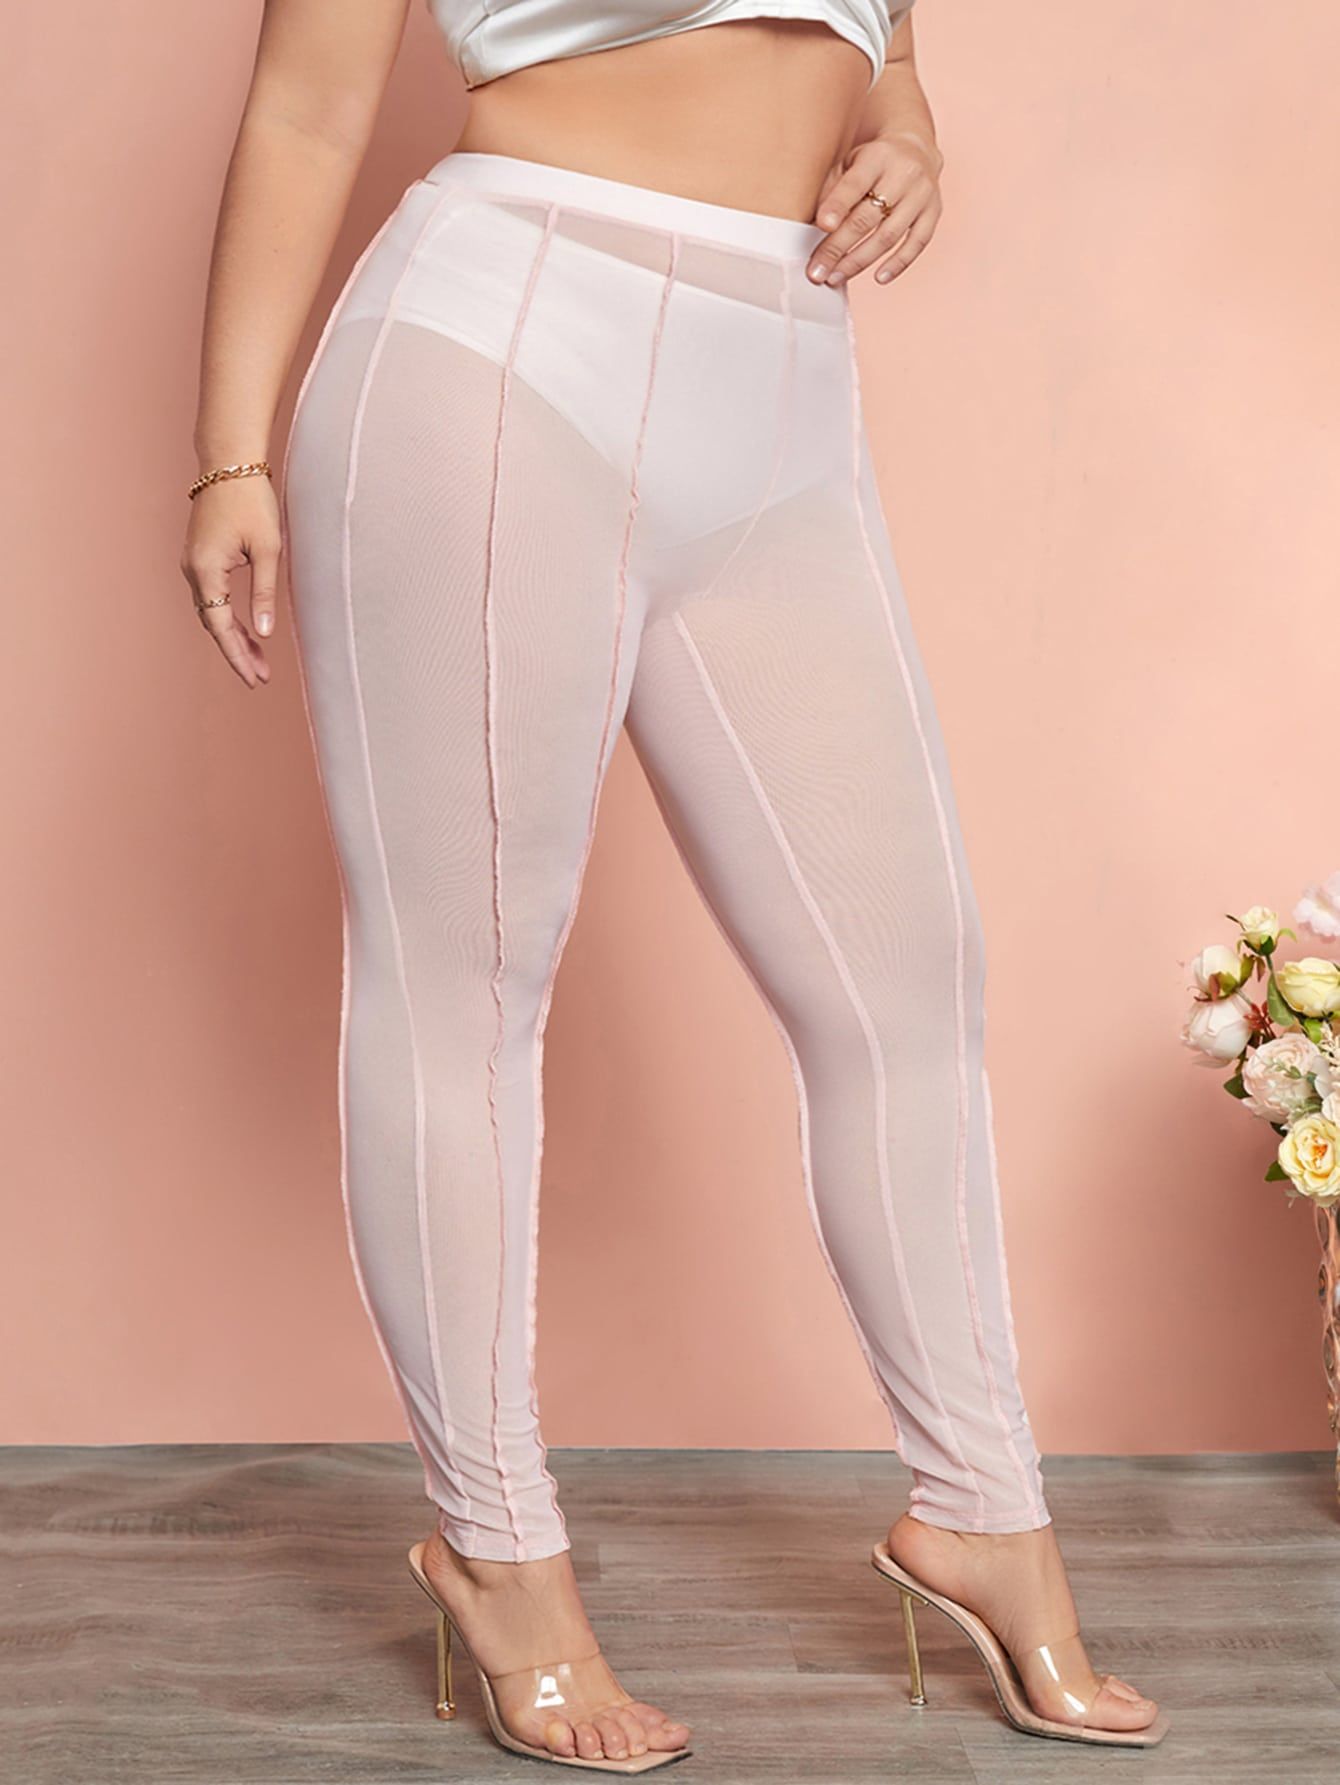 Look Sexy And Sensuous With Sheer Legging